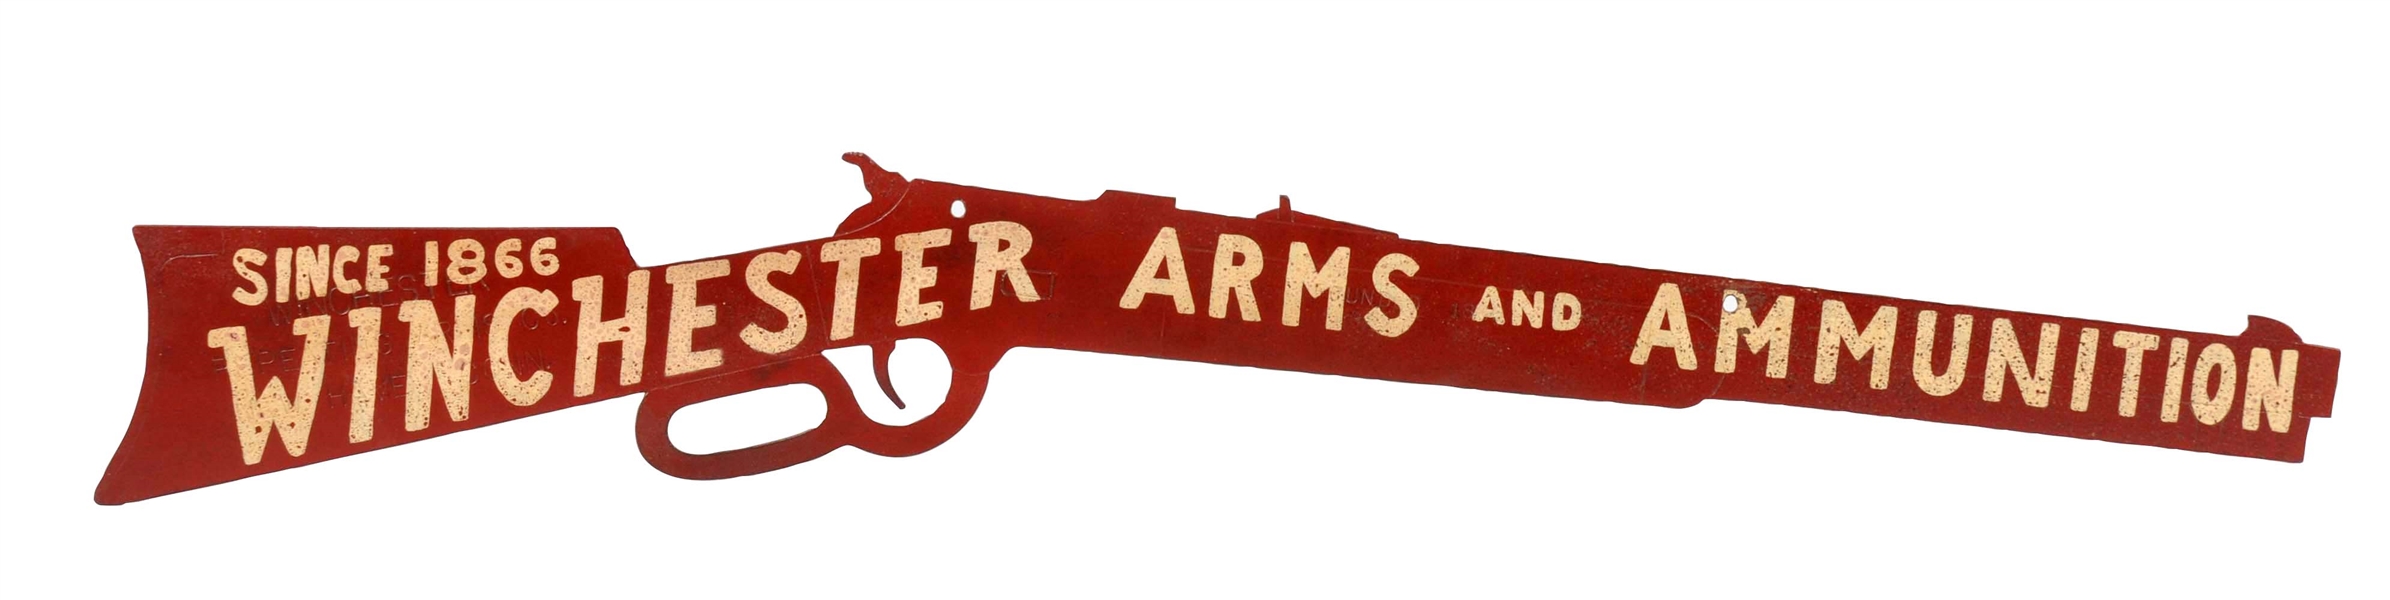 WINCHESTER ARMS & AMMUNITION METAL TRADE SIGN.